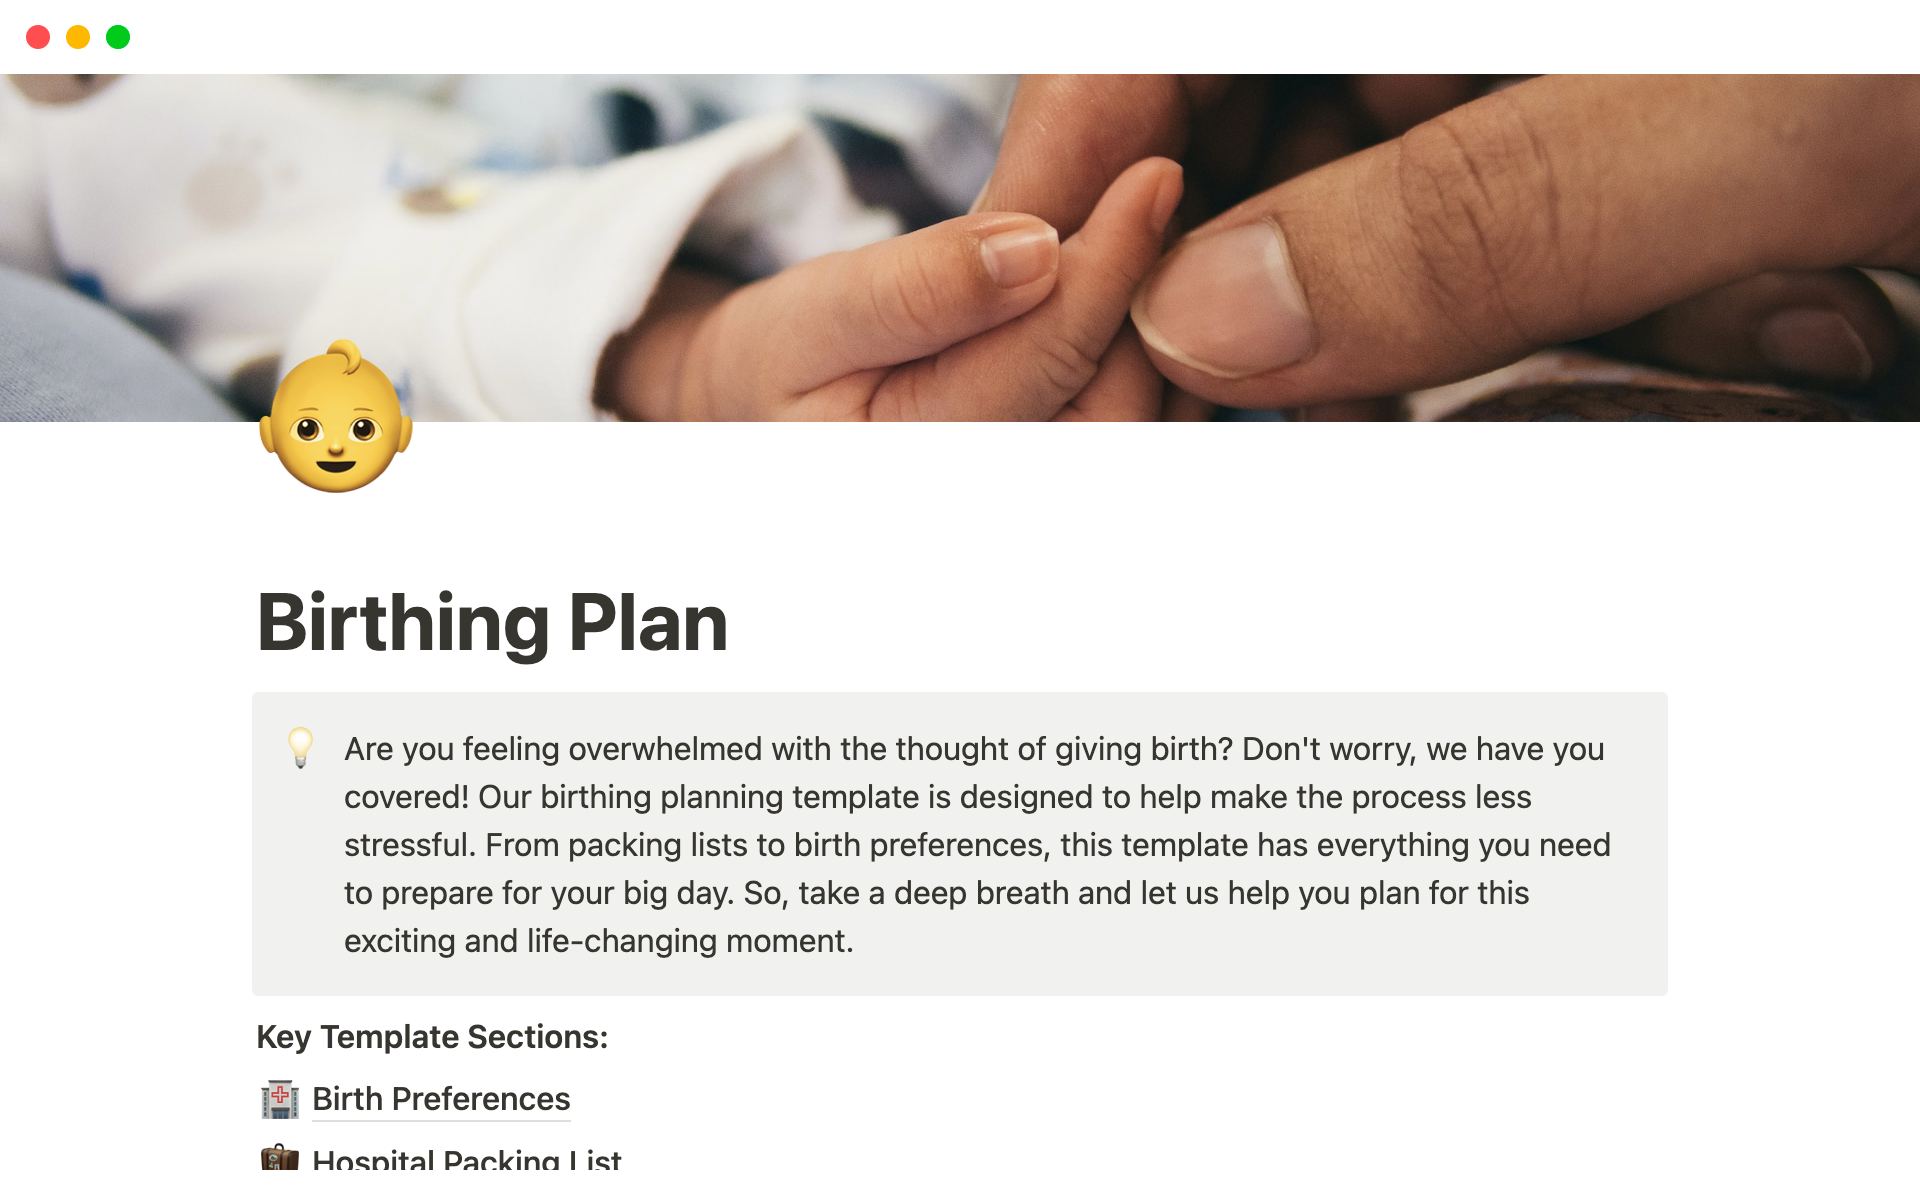 This digital guide offers expecting mothers a personalized birthing plan, a hospital bag checklist, an emergency contacts list, and a soothing music playlist for a smooth journey to motherhood.